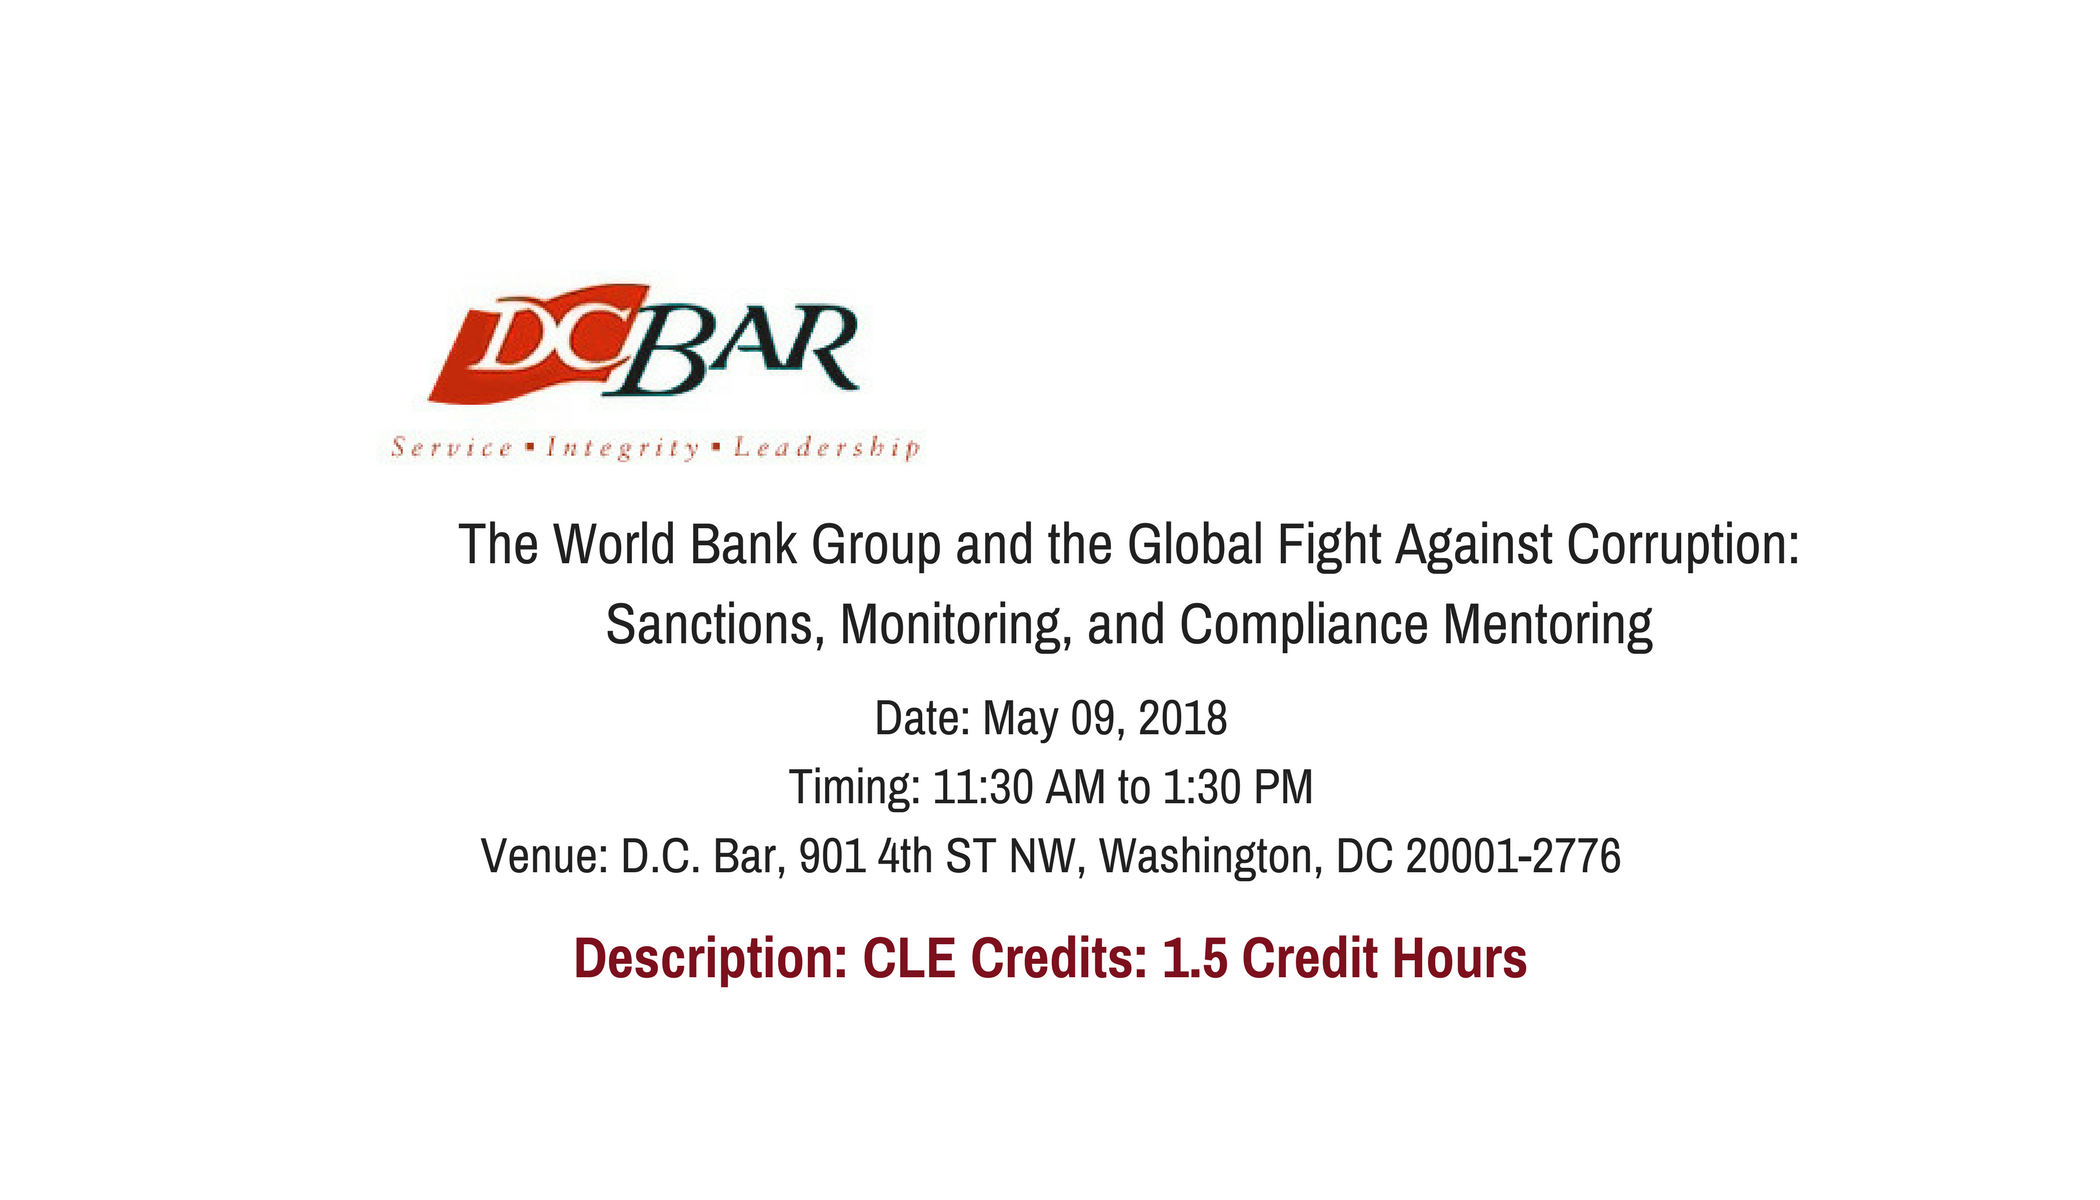 INBA is delighted to support the DC Bar The World Bank Group and the Global Fight Against Corruption: Sanctions, Monitoring and Compliance Mentoring